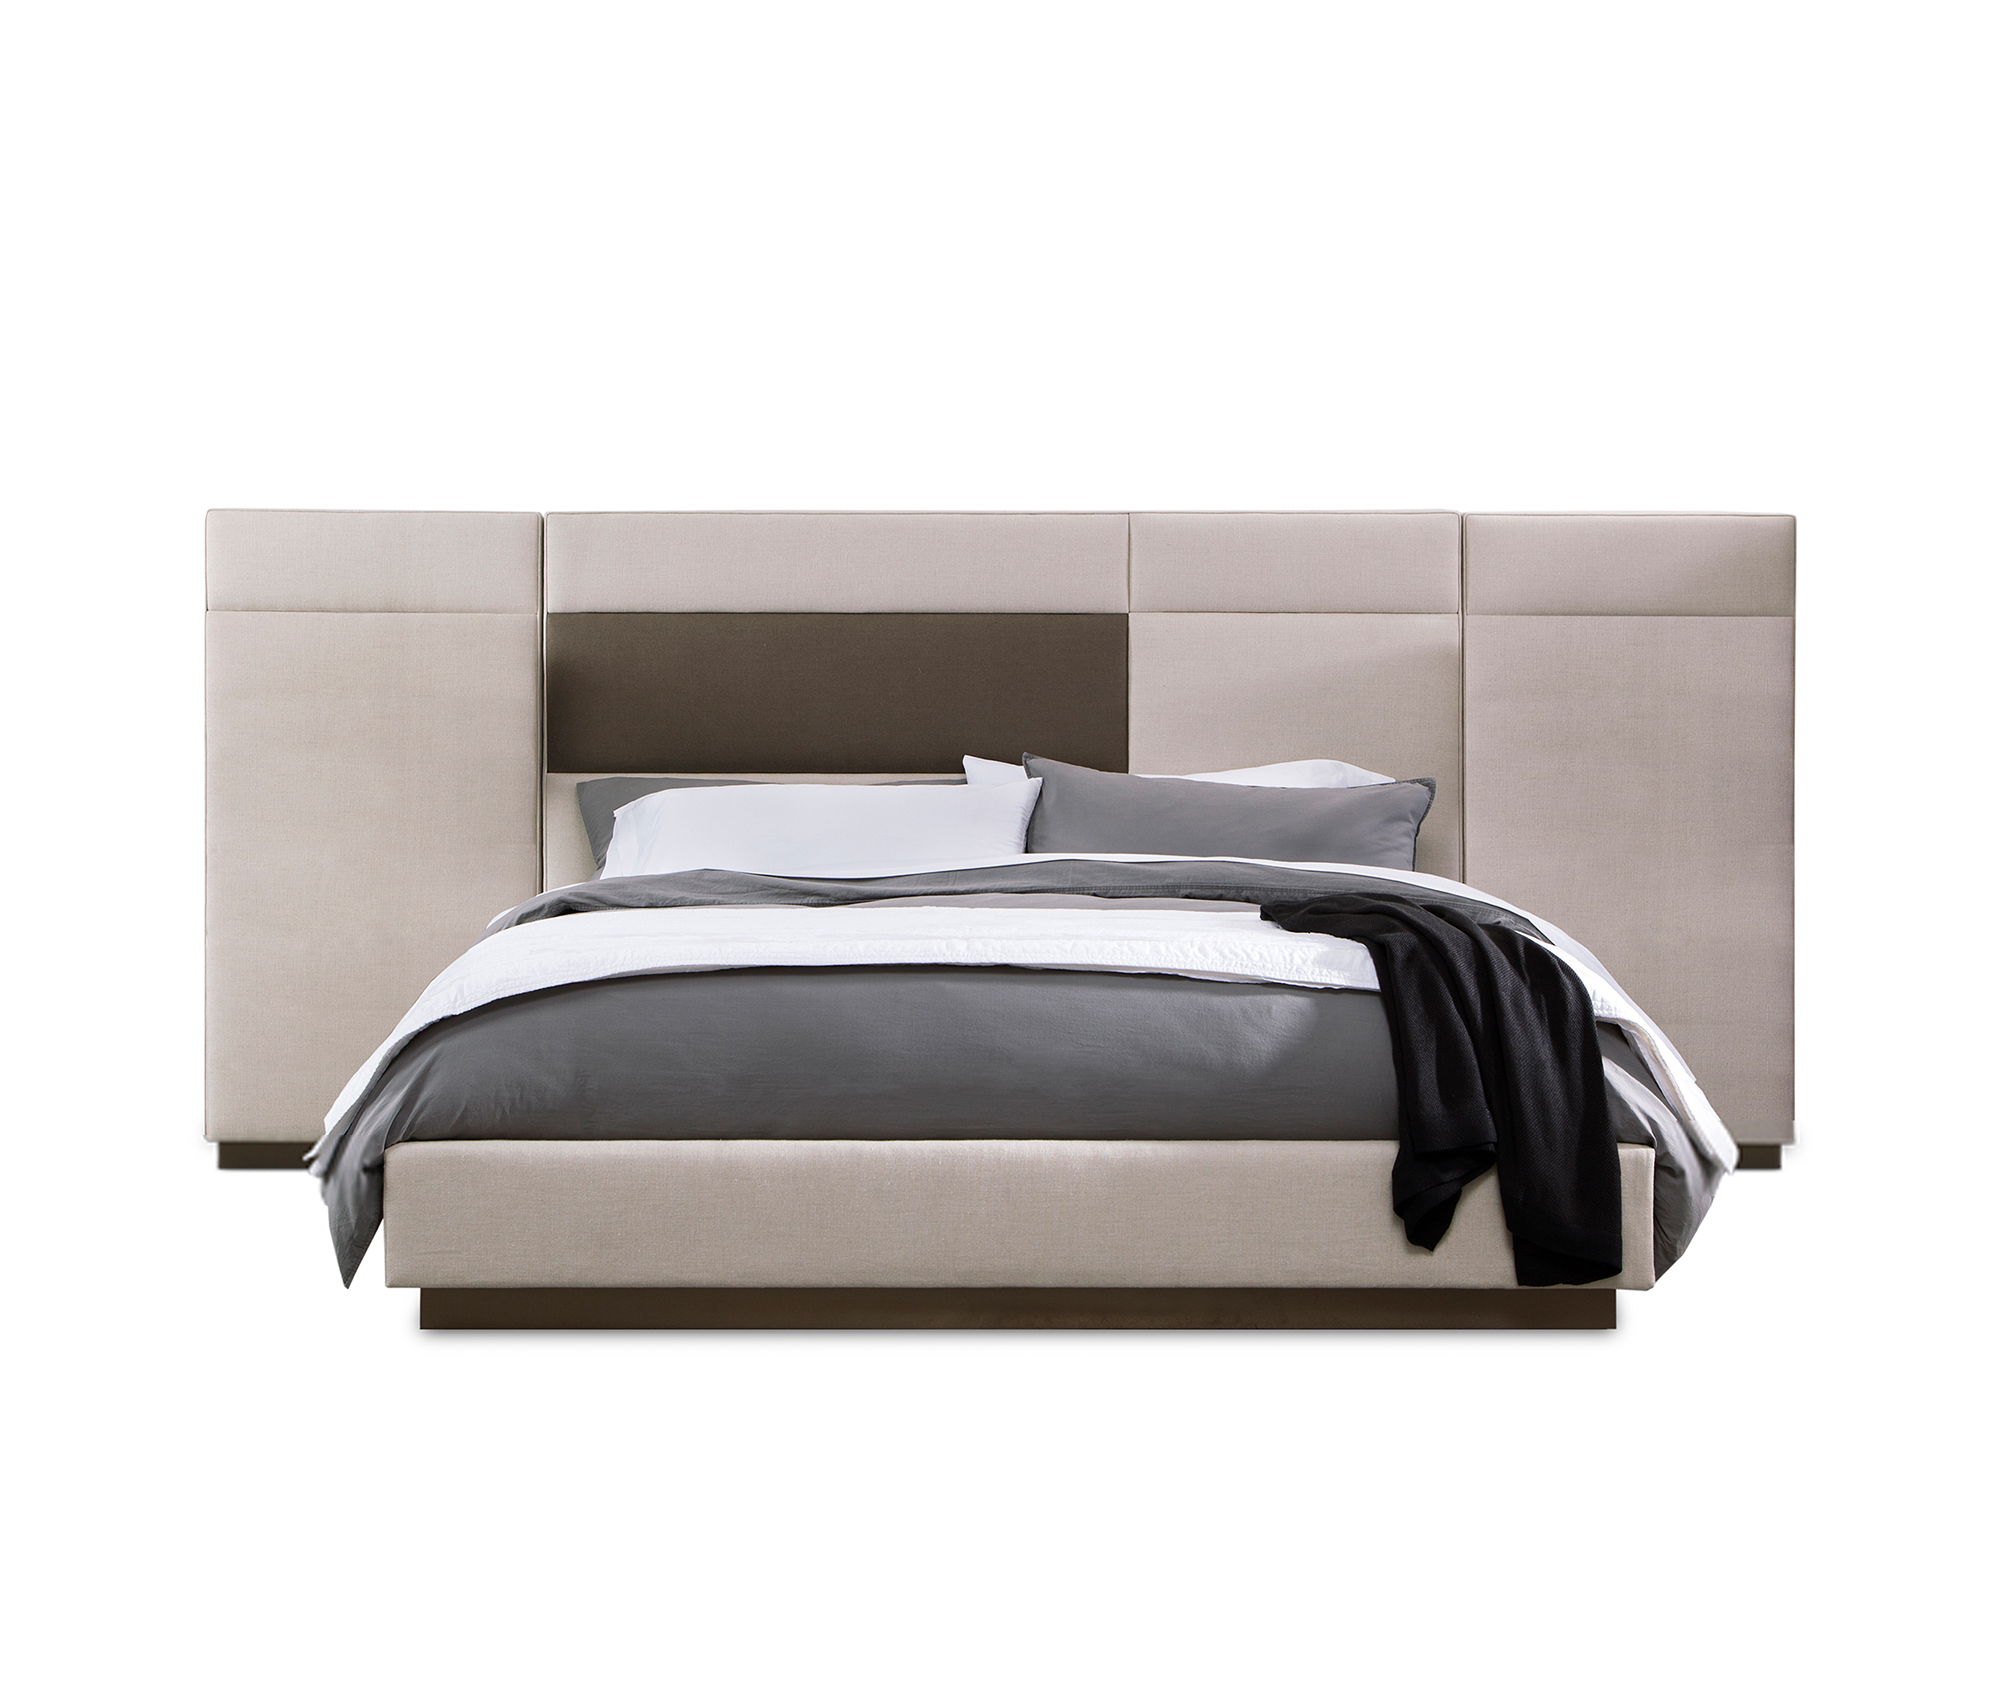 Interlude-Home_Quadrant-Bed-with-Side-Panels_int_products